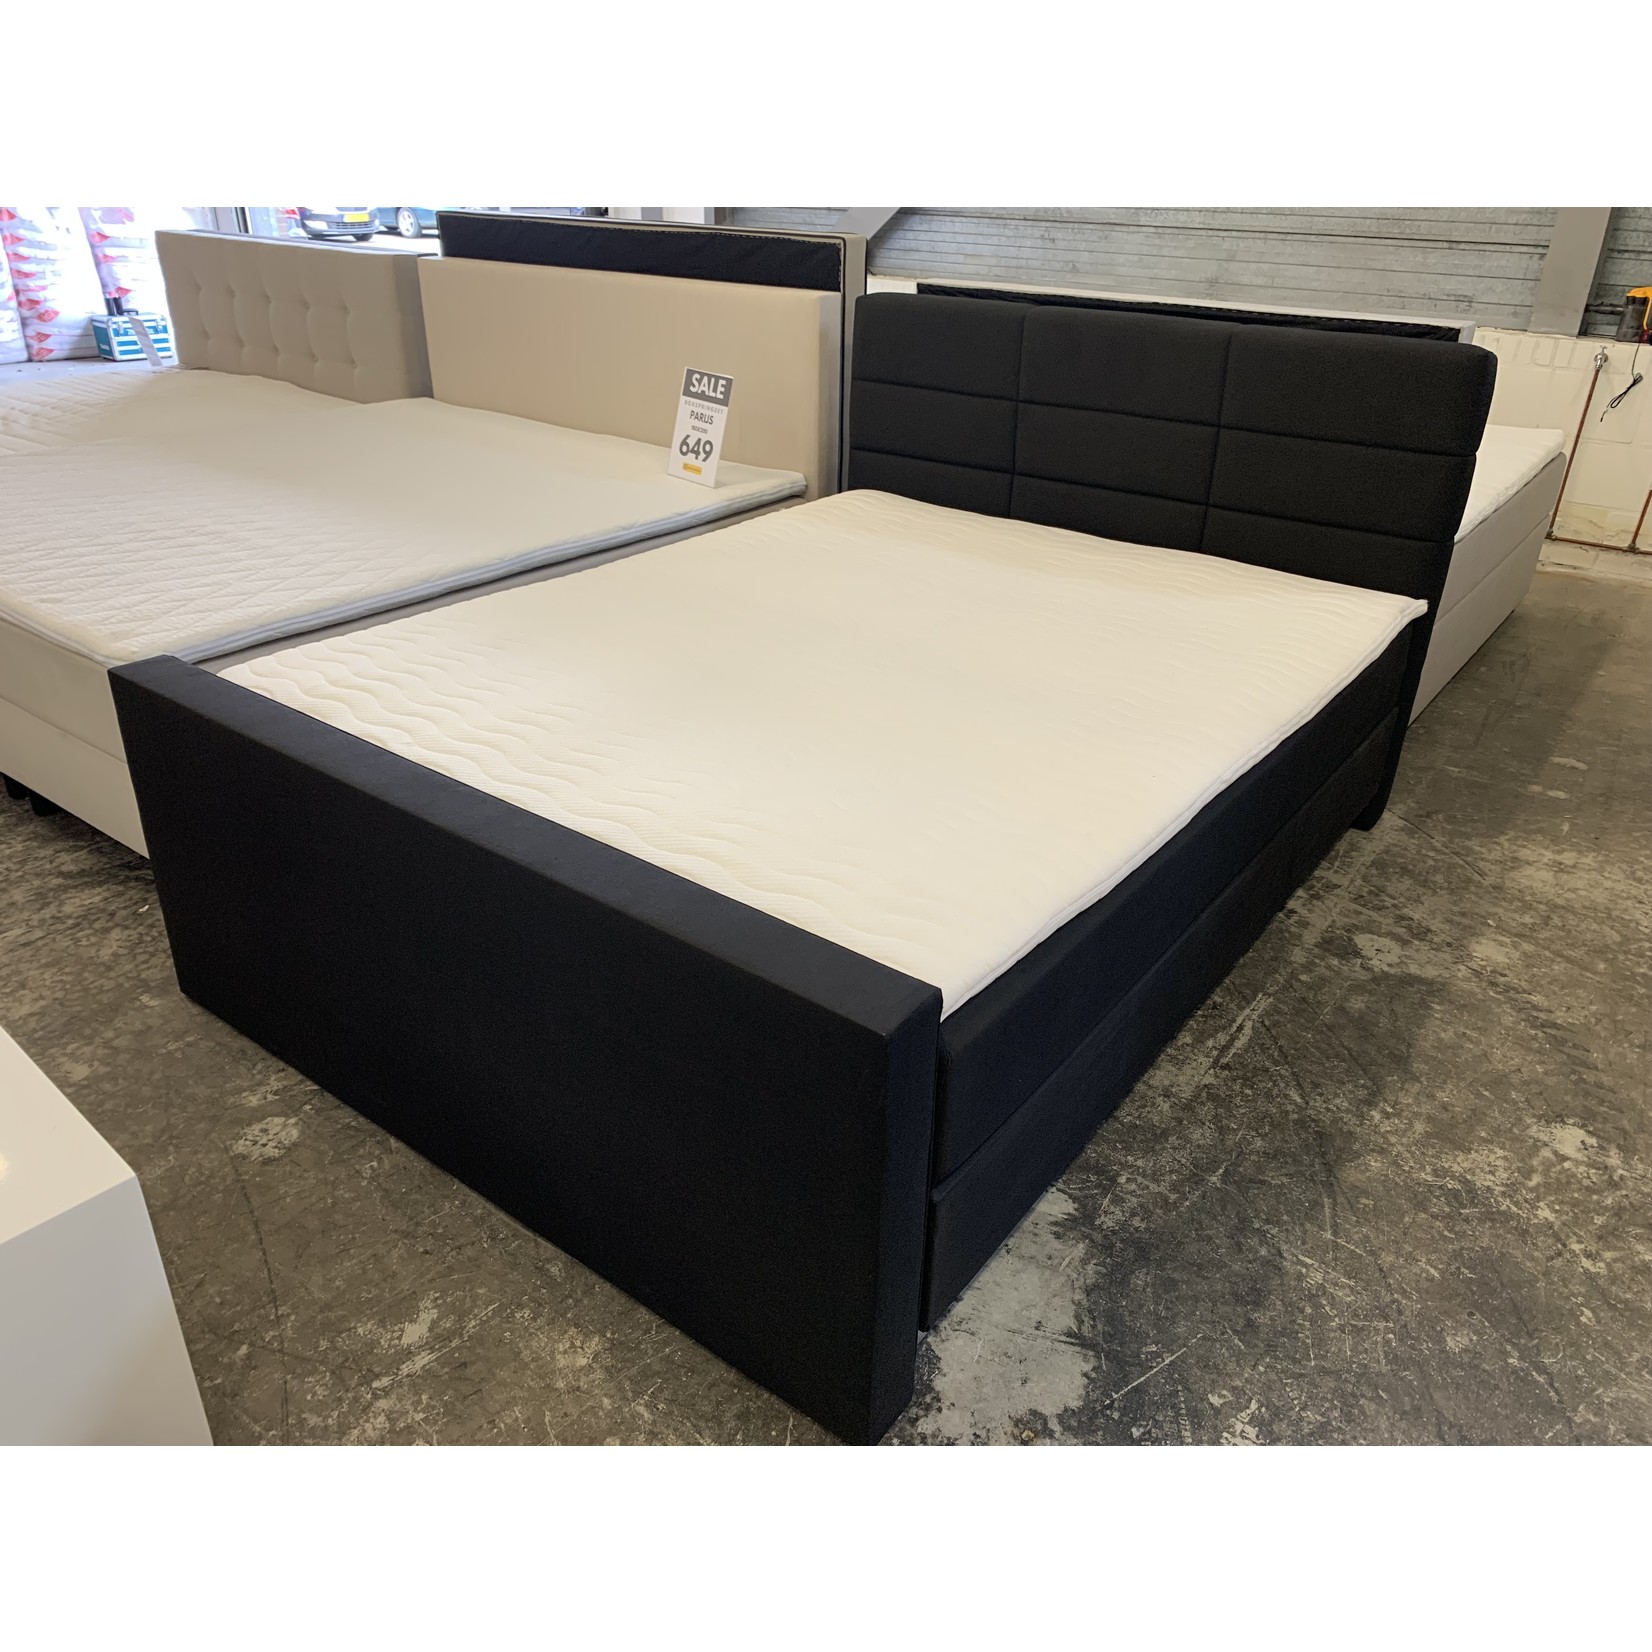 Boxspring Amsterdam - outlet-bedden